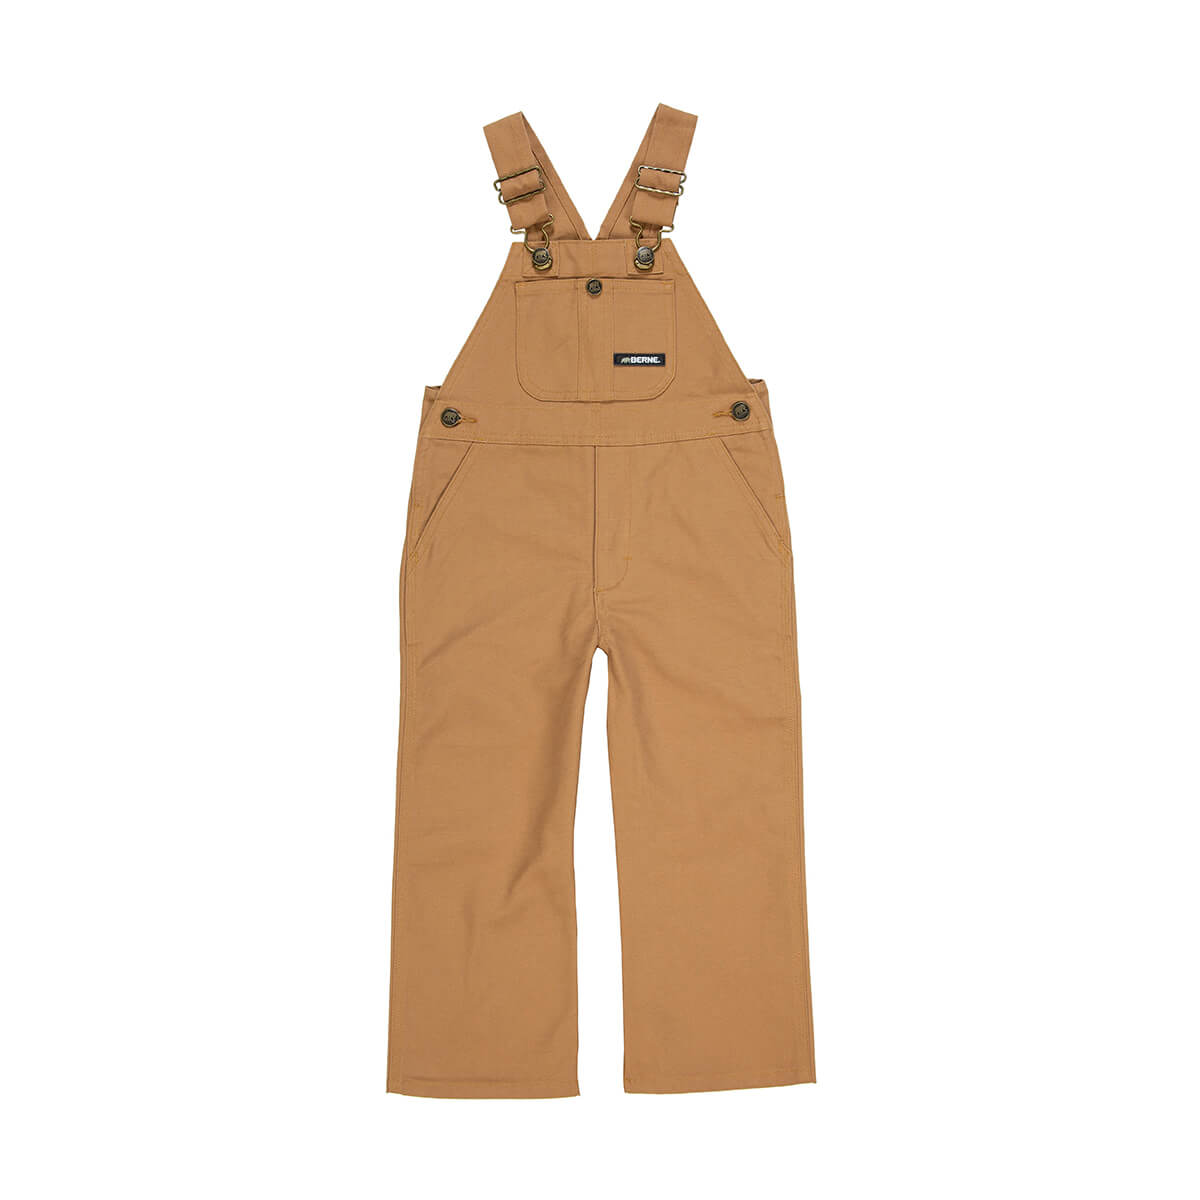 Youth Unlined Overalls